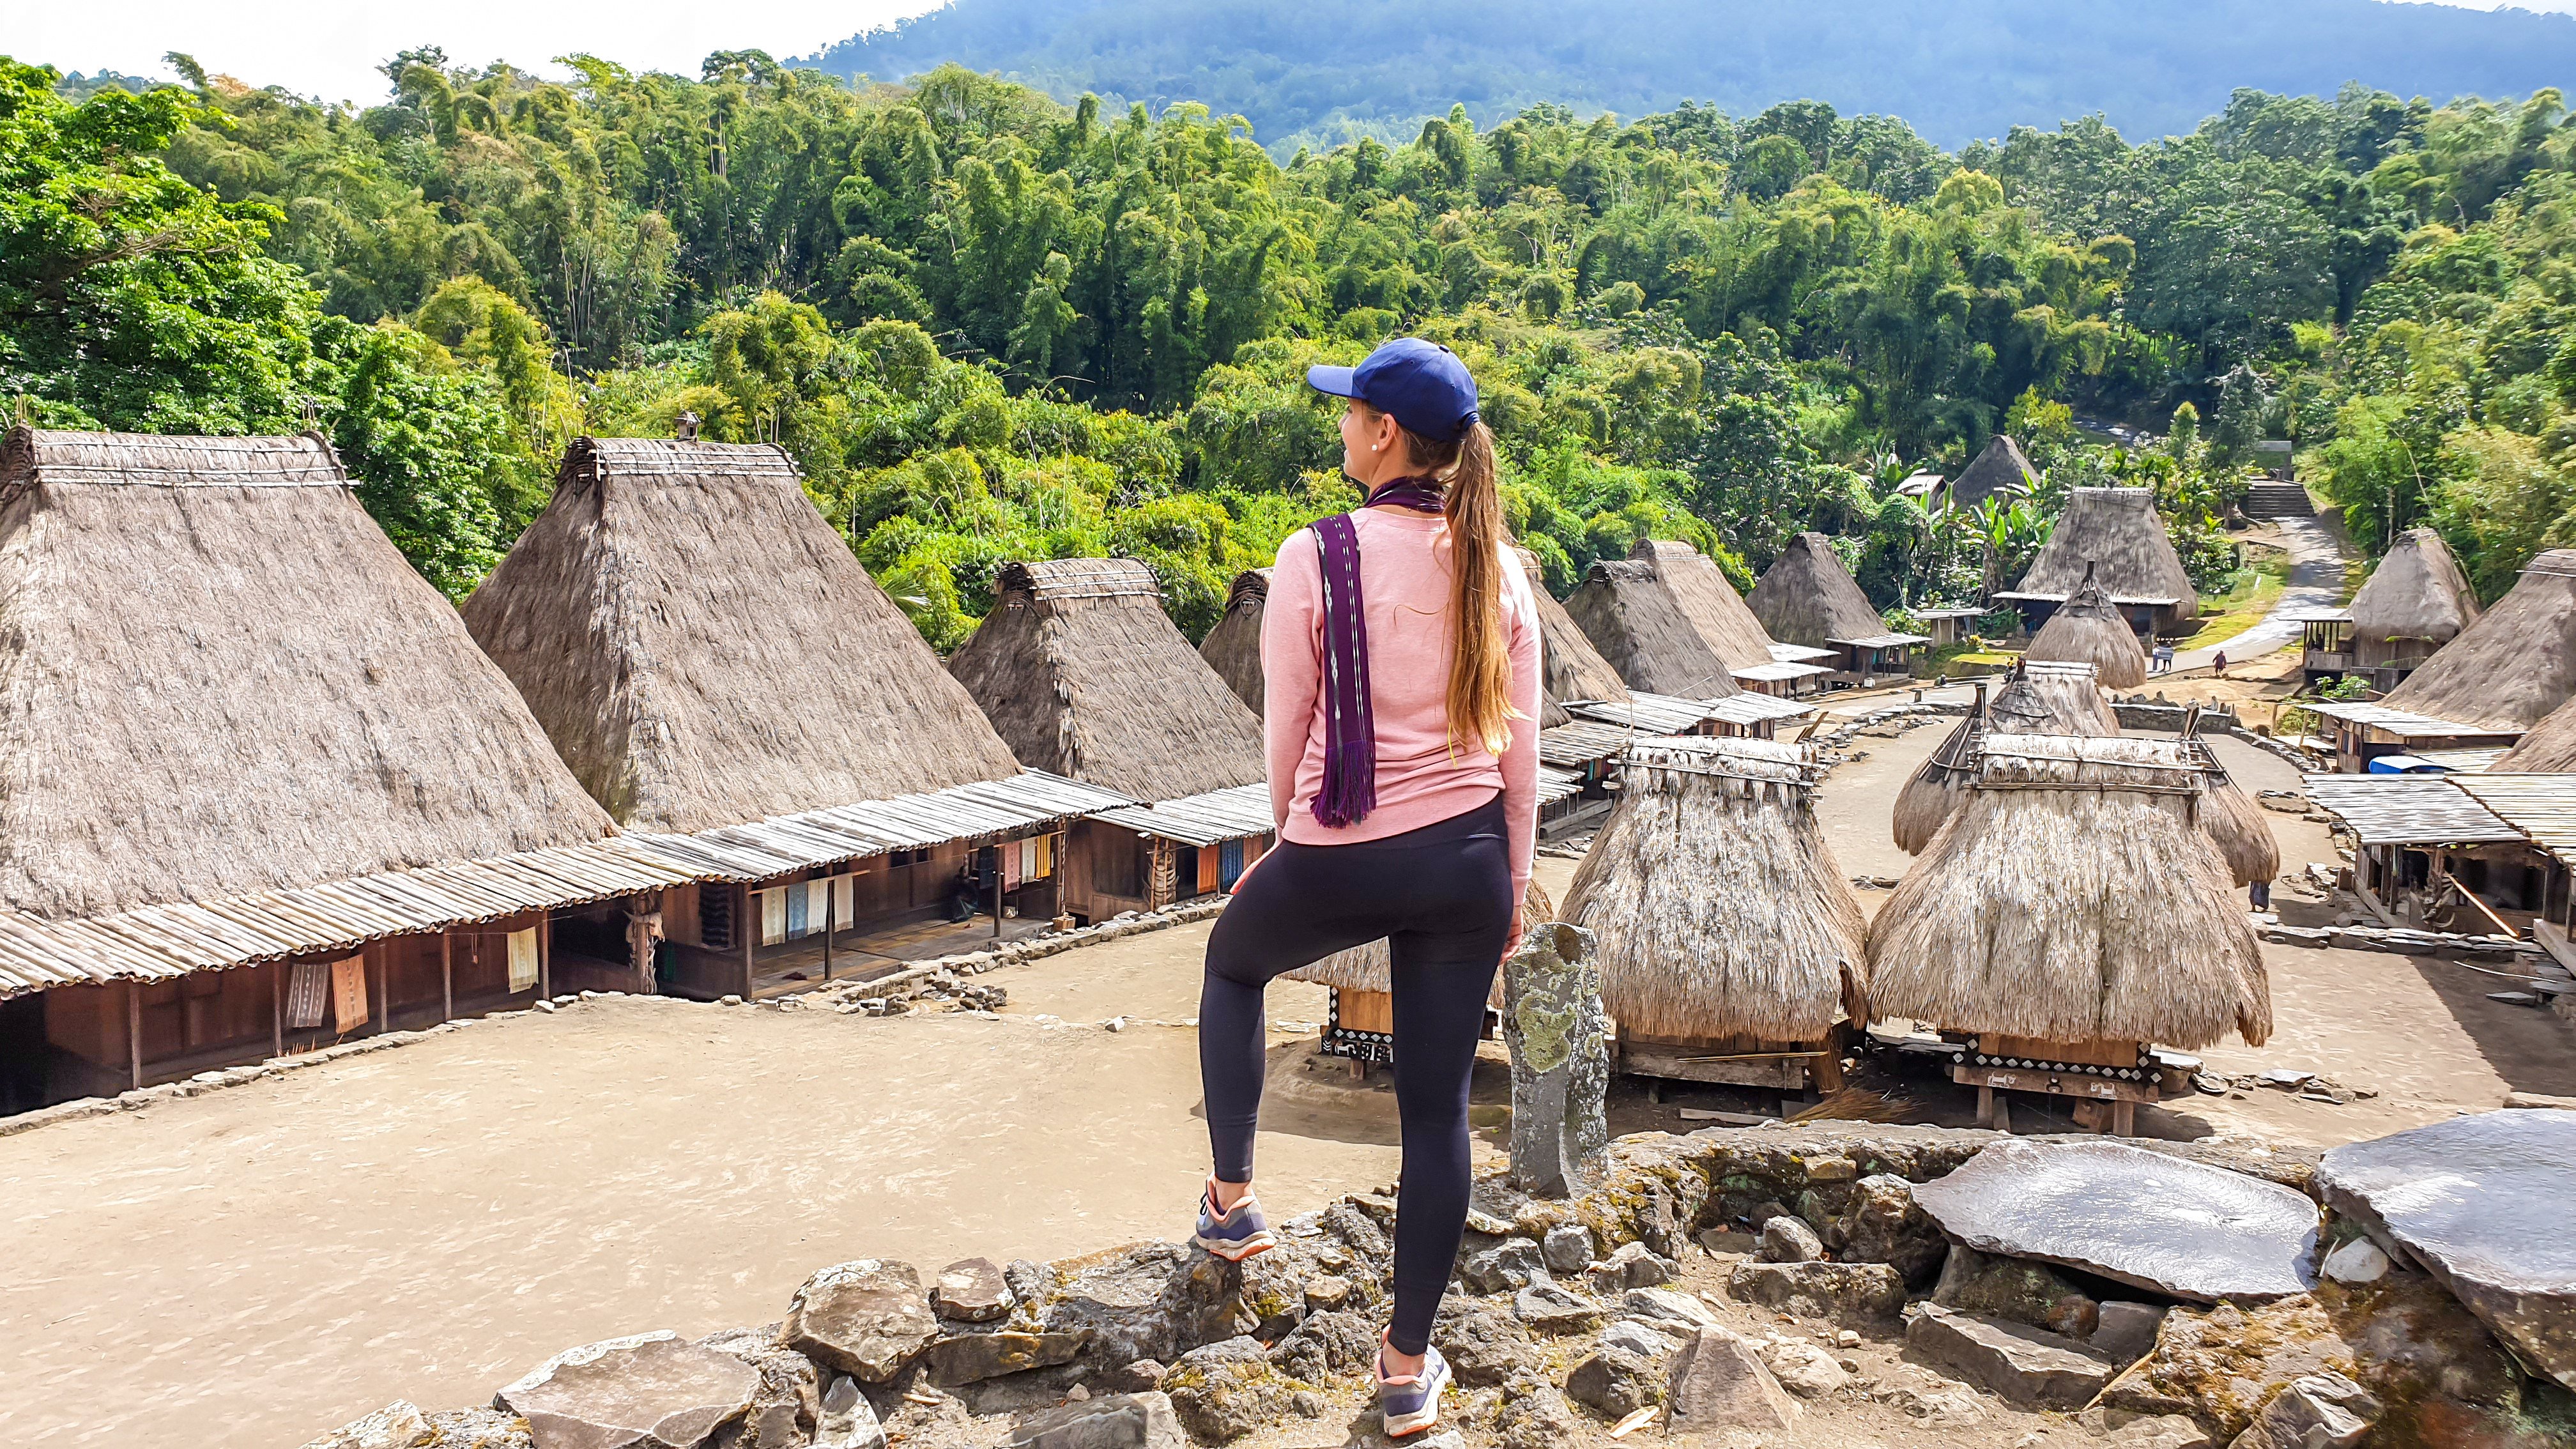 A young woman takes in the view in Beno village in Flores, Indonesia. Young travellers are more likely to prioritise photography and smaller accommodation on their holidays than their older counterparts. Photo: Getty Images